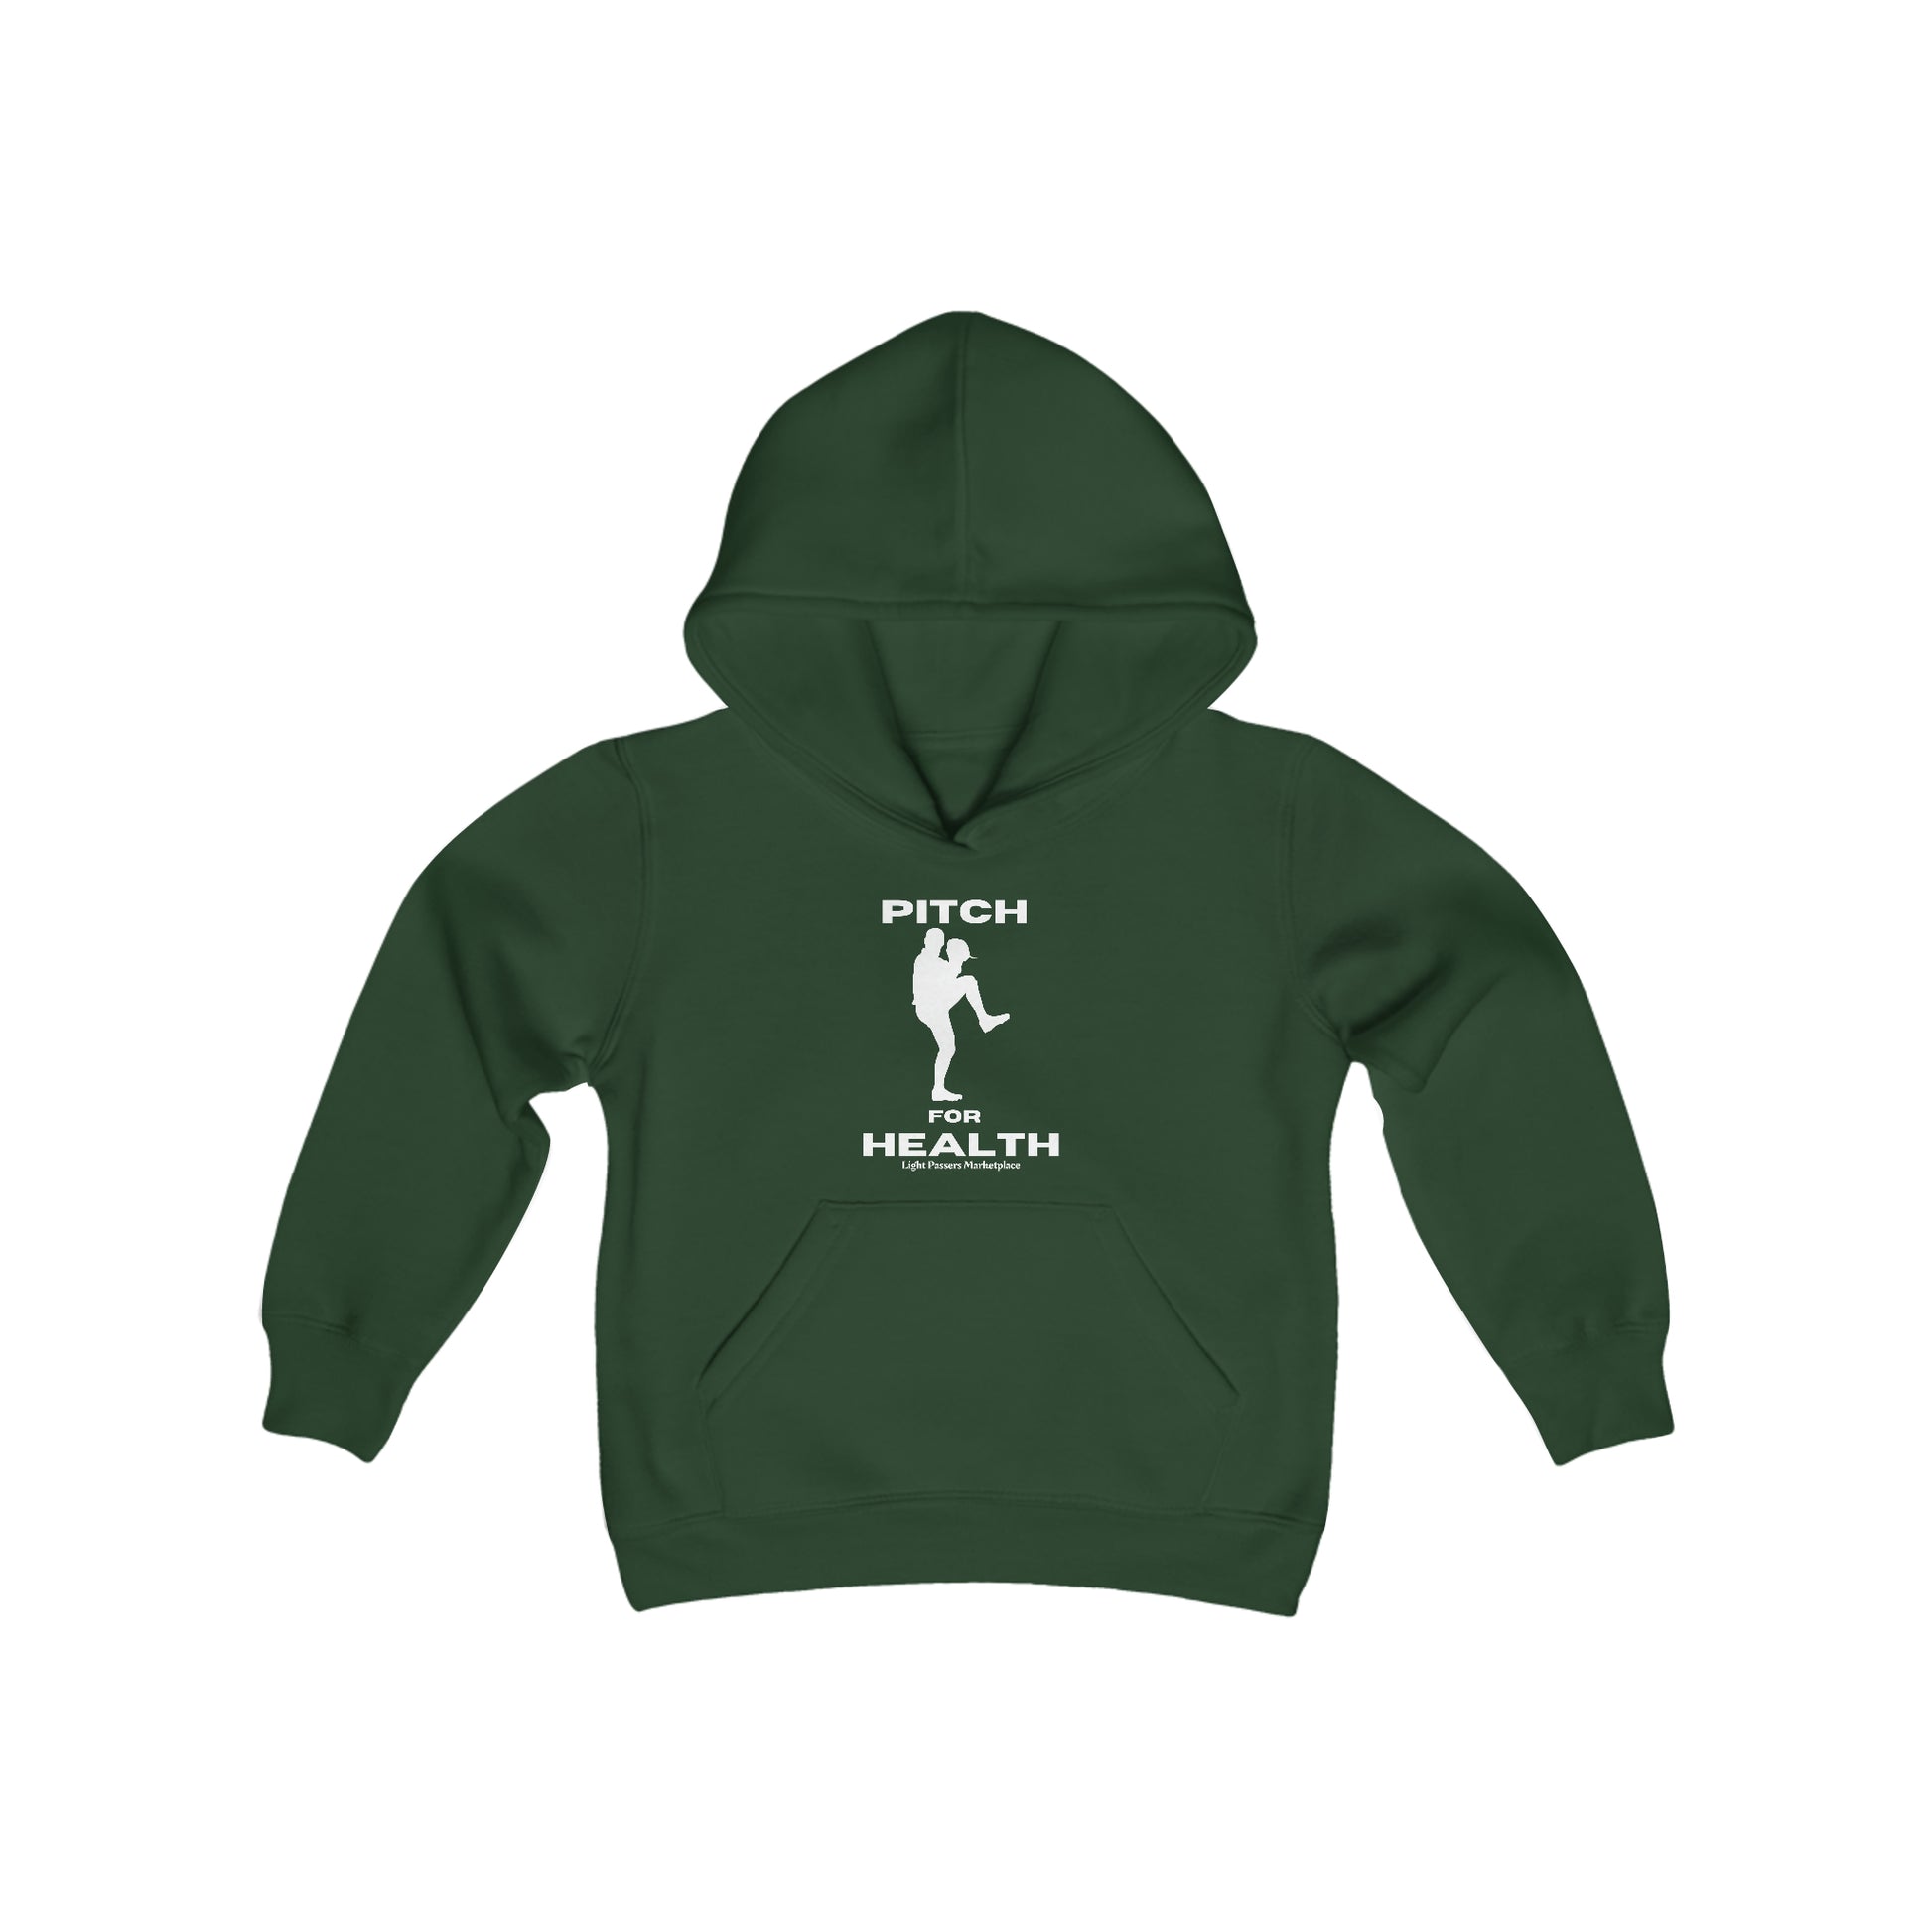 A green hoodie with white text, kangaroo pocket, and reinforced neck. Made of 50% cotton, 50% polyester blend for softness and reduced lint. Perfect for printing.